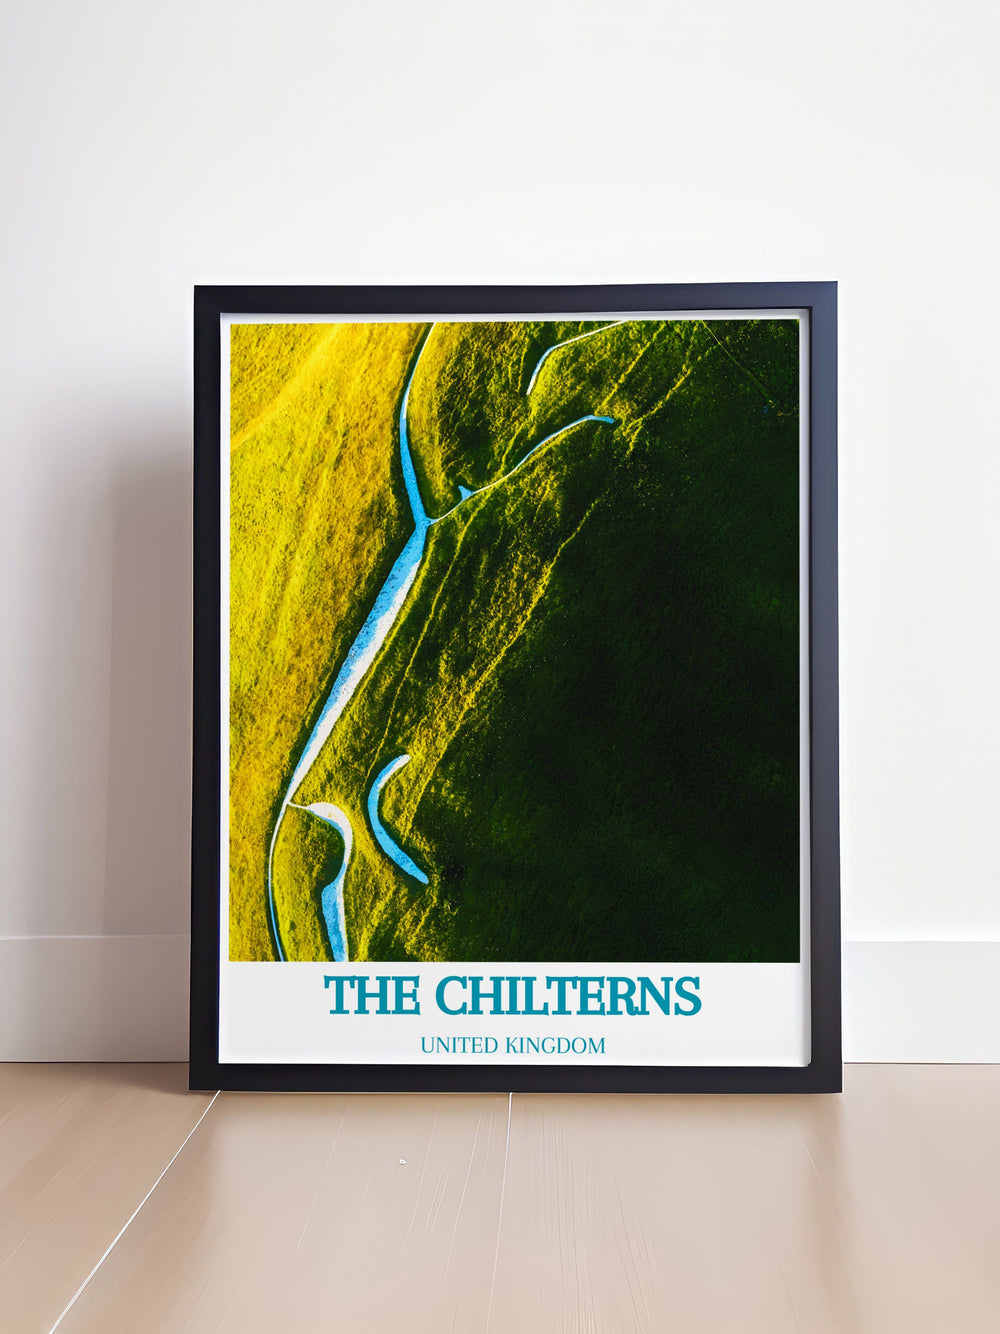 Beautiful Ridgeway Framed Art depicting the historic path through The Chilterns, capturing the scenic trail and breathtaking views, perfect for history enthusiasts and nature lovers.